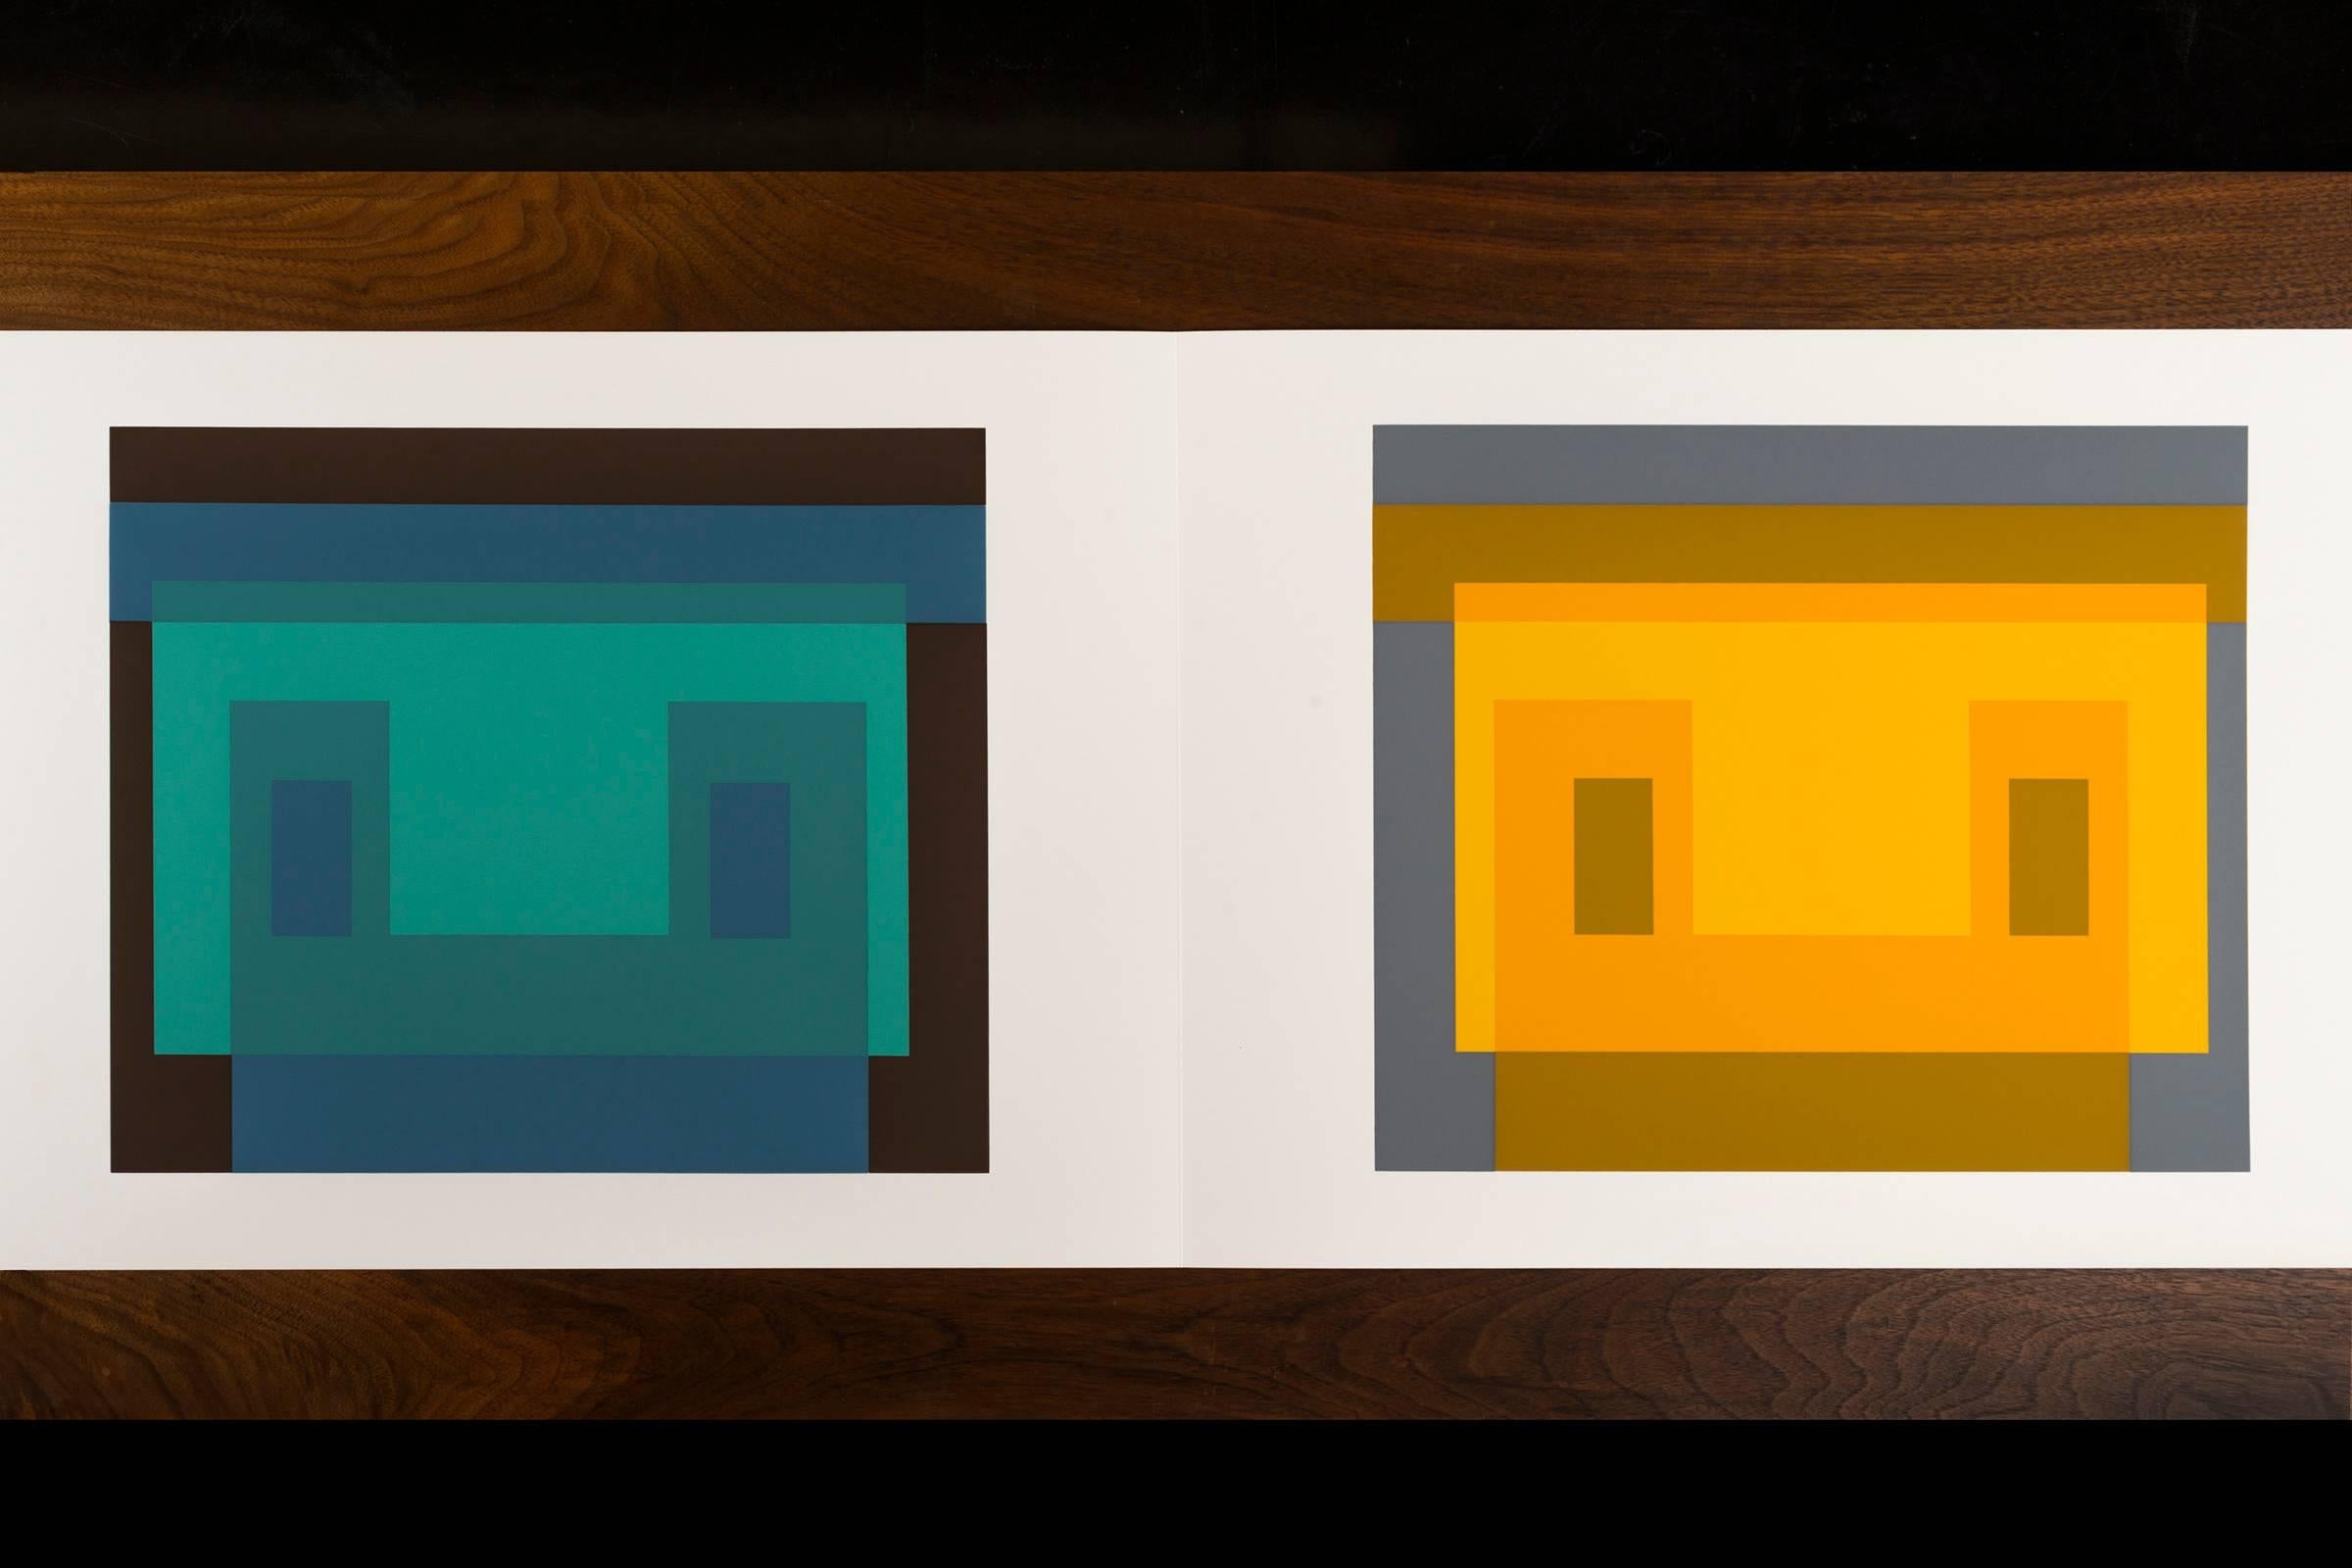 Josef Albers formulations - Articulations I & II Print #9
Edition 974/ 1000
1972 screen-print on paper
Embossed with Josef Albers initials, portfolio and folder number. This work is published by Harry N. Abrams and Ives-Sillman.
This work has never